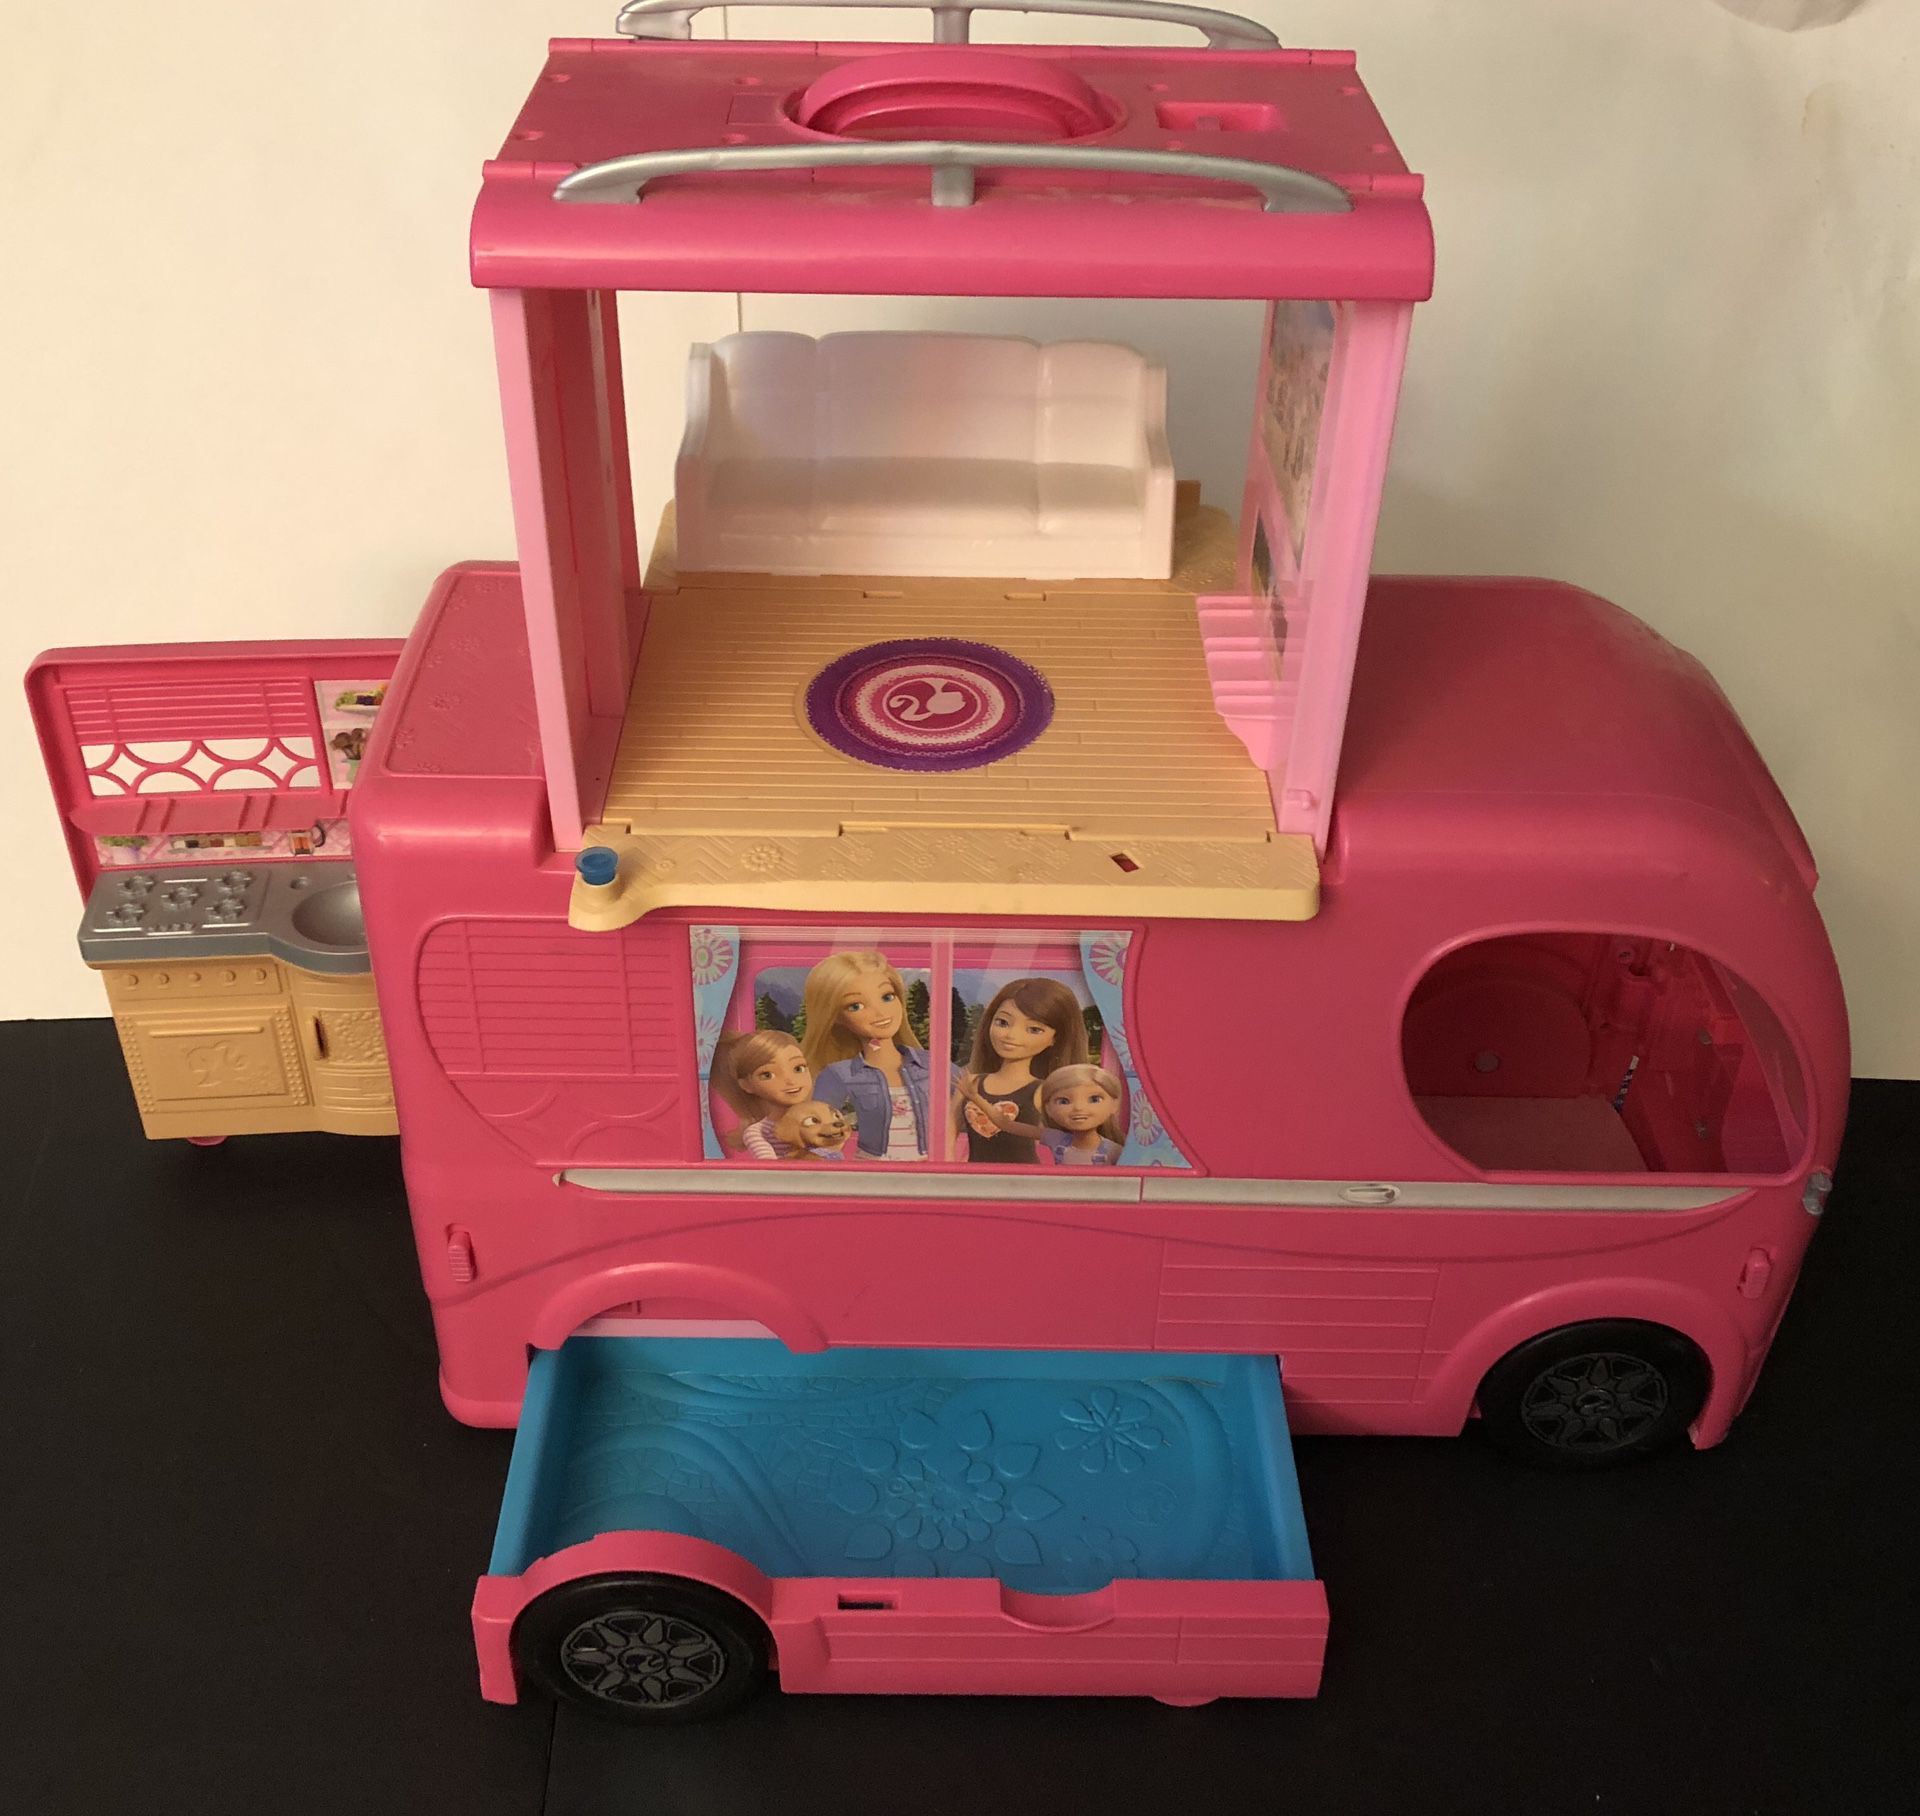 Gently used 2014 Mattel Barbie Pop Up Camping RV